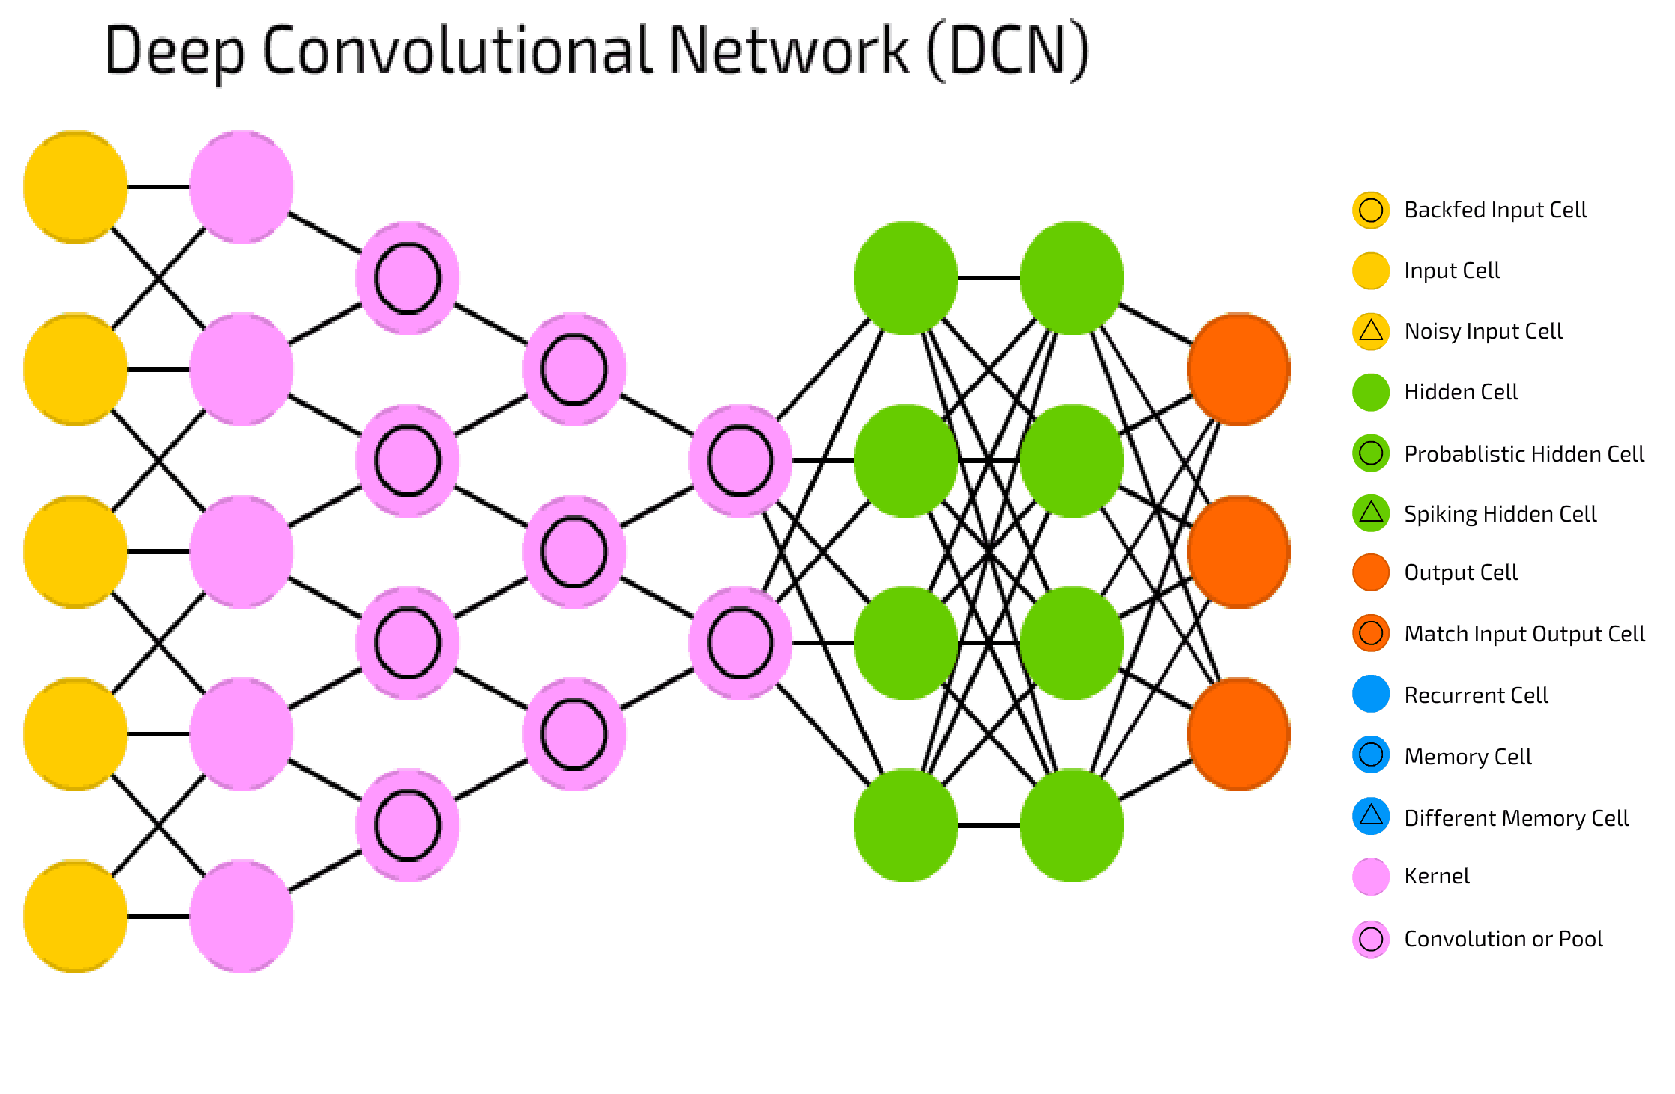 The Deep Convolutional Neural Network Architecture Adapted From